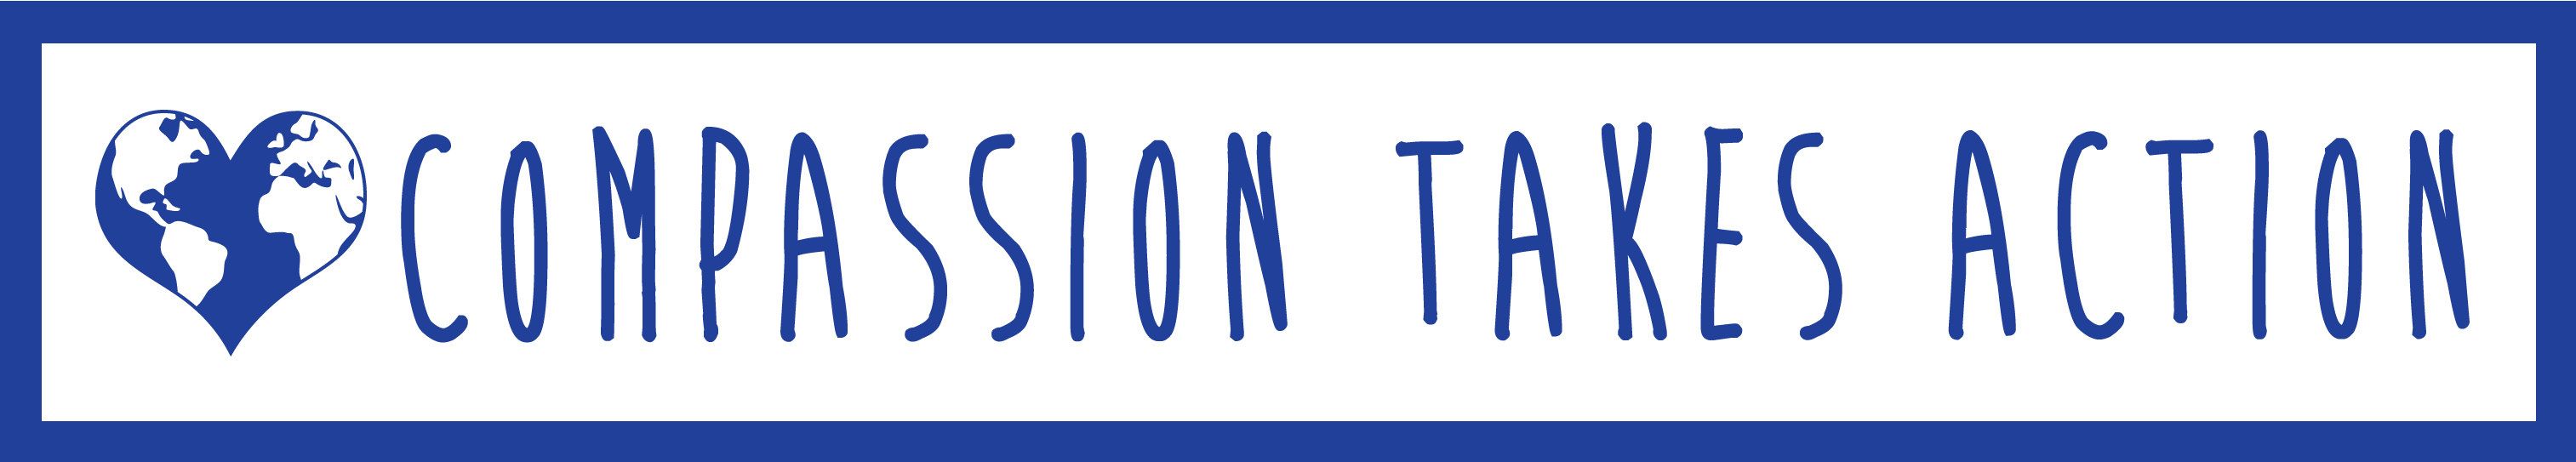 Compassiontakesaction.org logo